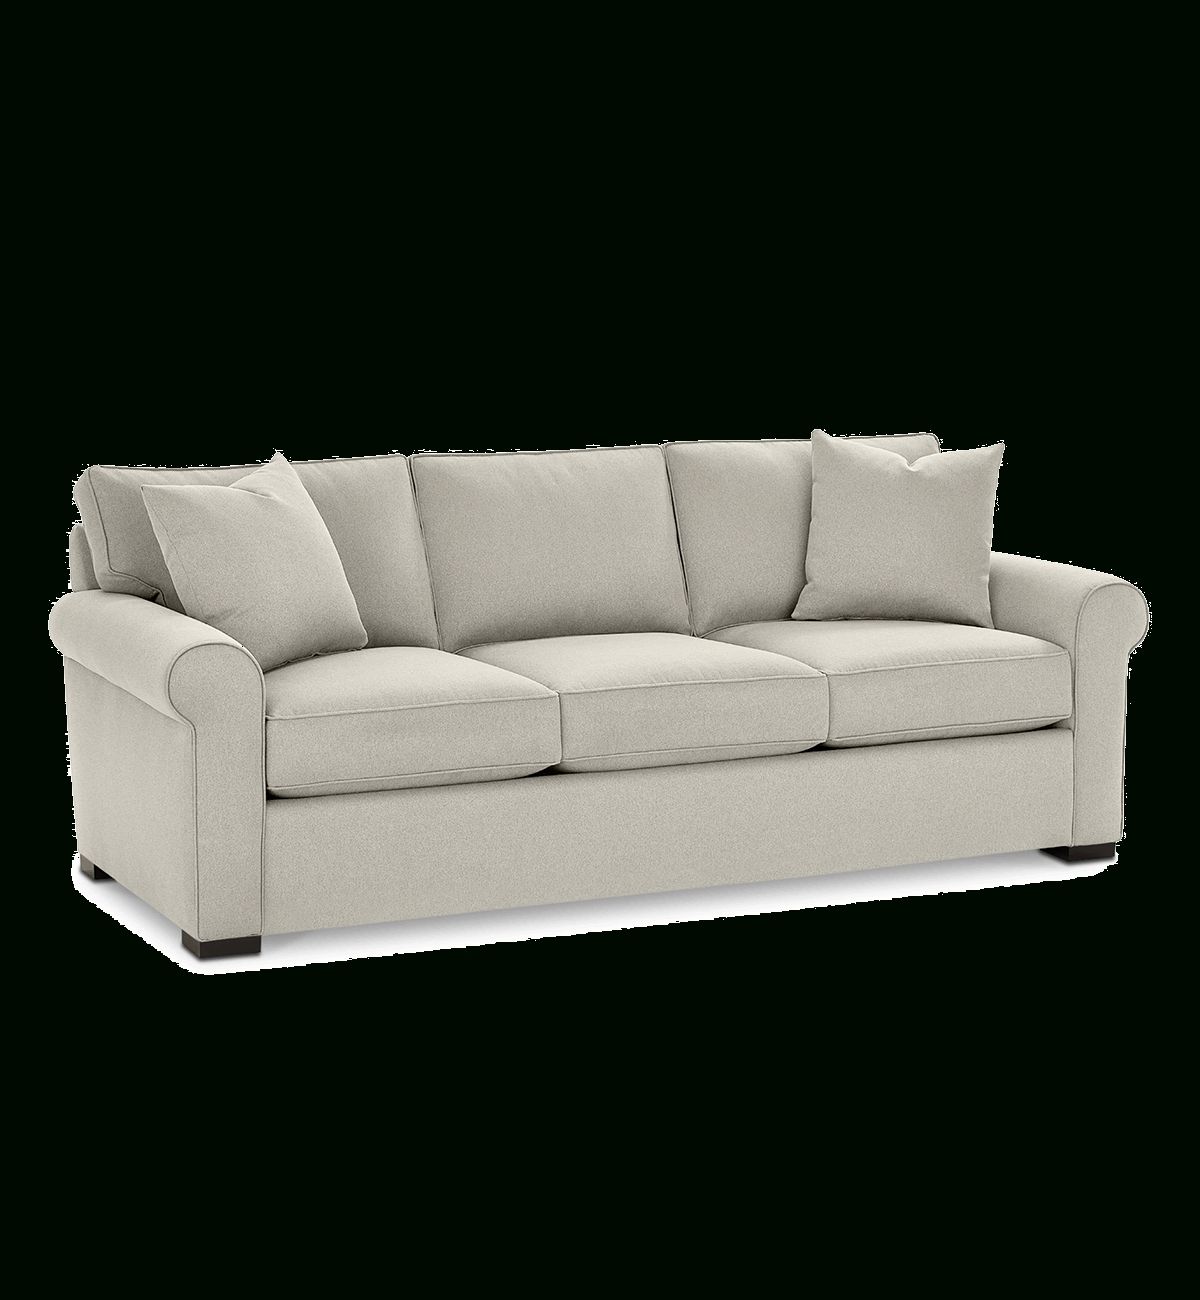 Leather Couches And Sofas – Macy's Within Macys Leather Sofas (View 3 of 10)